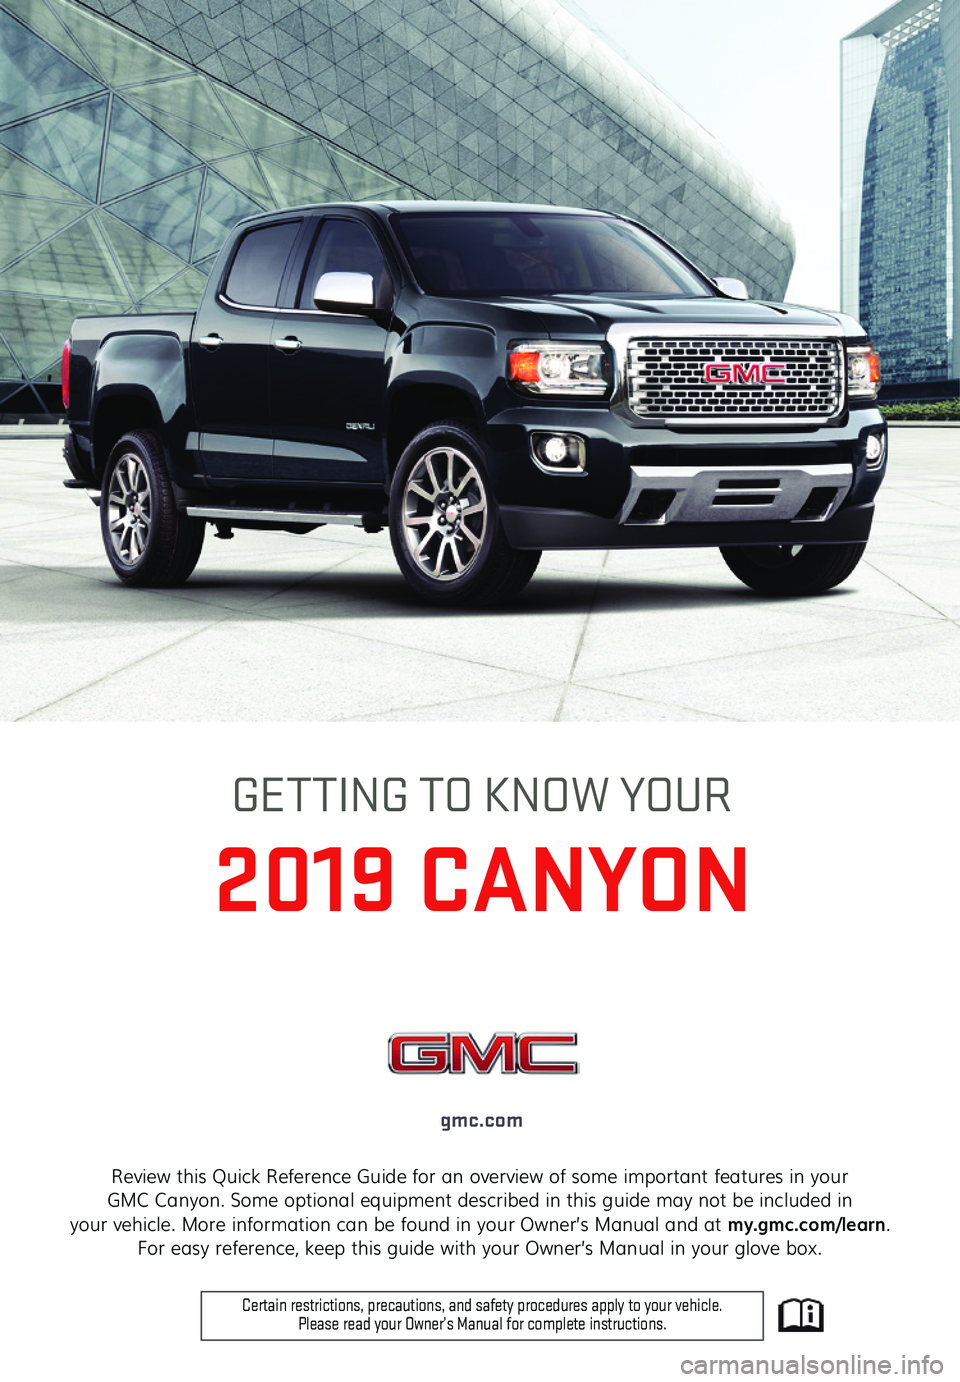 GMC CANYON 2019  Get To Know Guide 